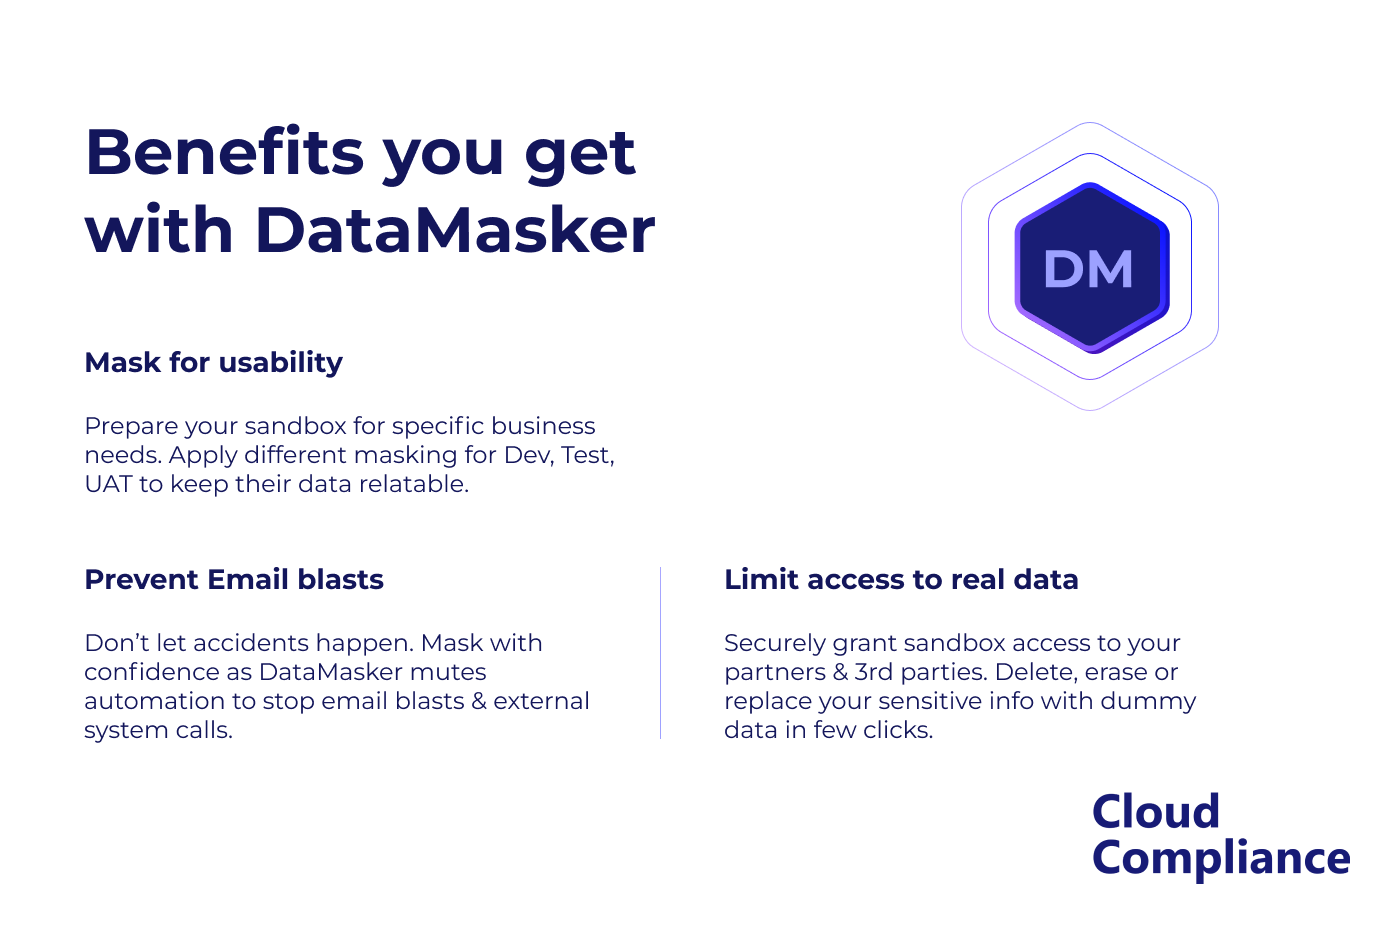 Benefits you get with Cloud Compliance DataMasker